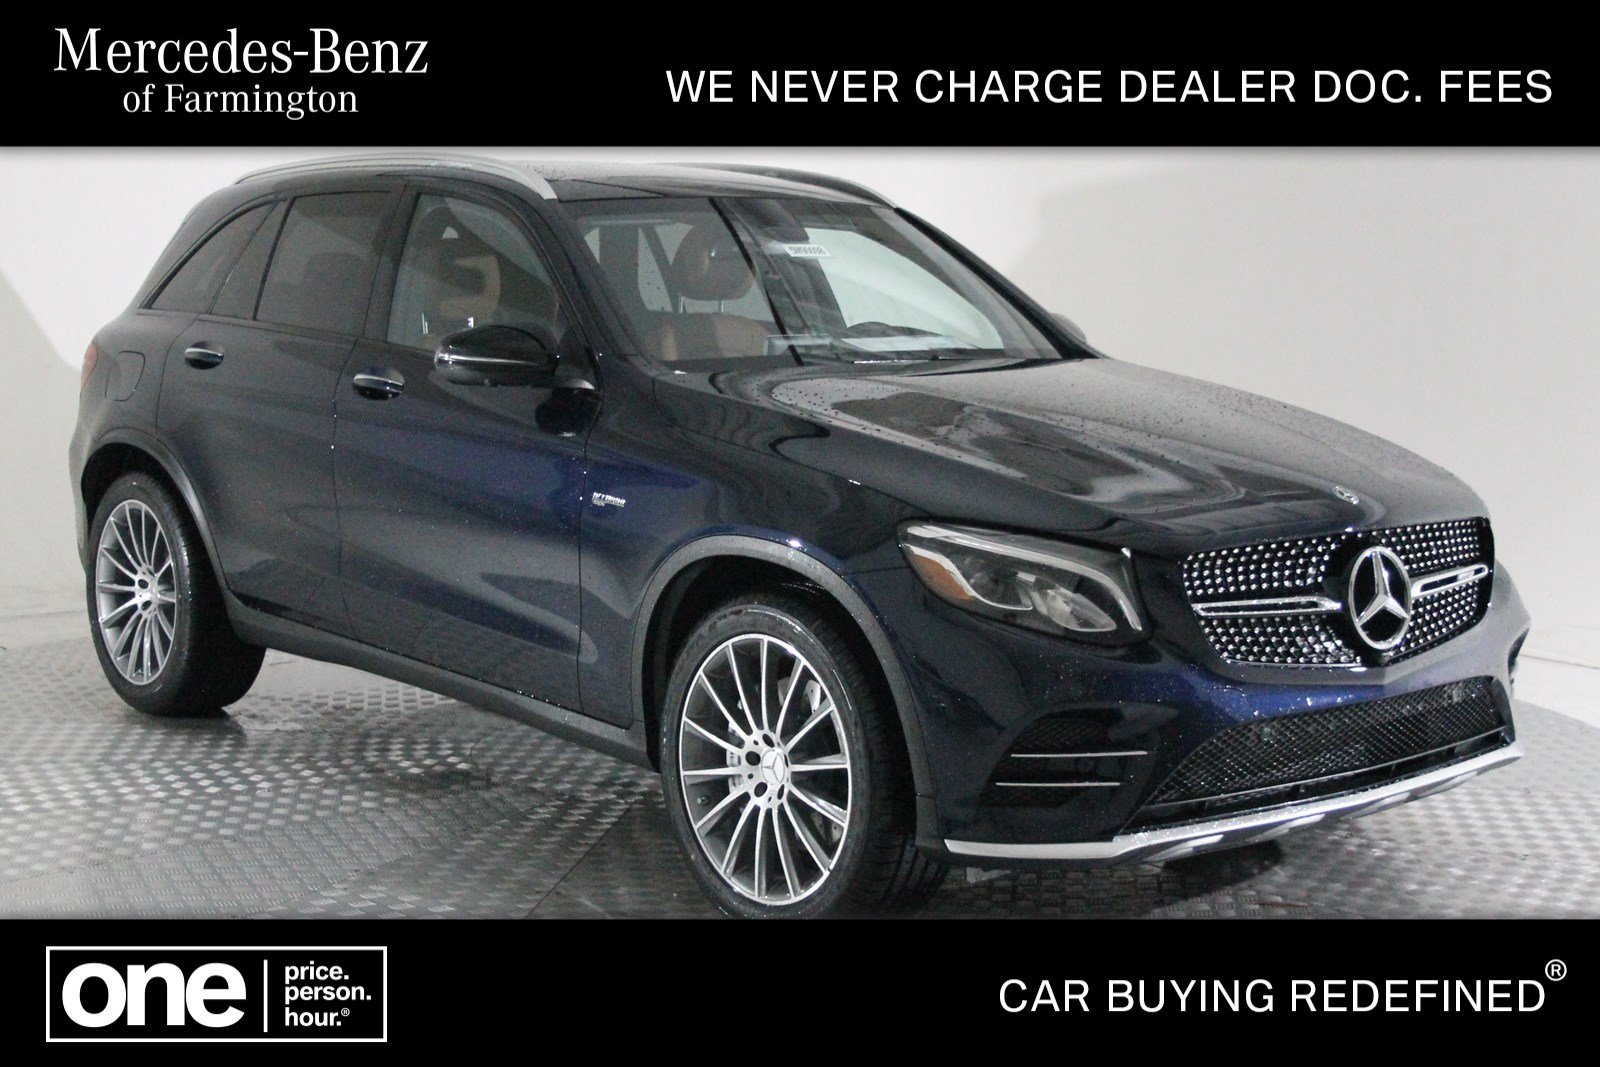 New 2019 Mercedes Benz Amg 43 Suv Awd 4matic